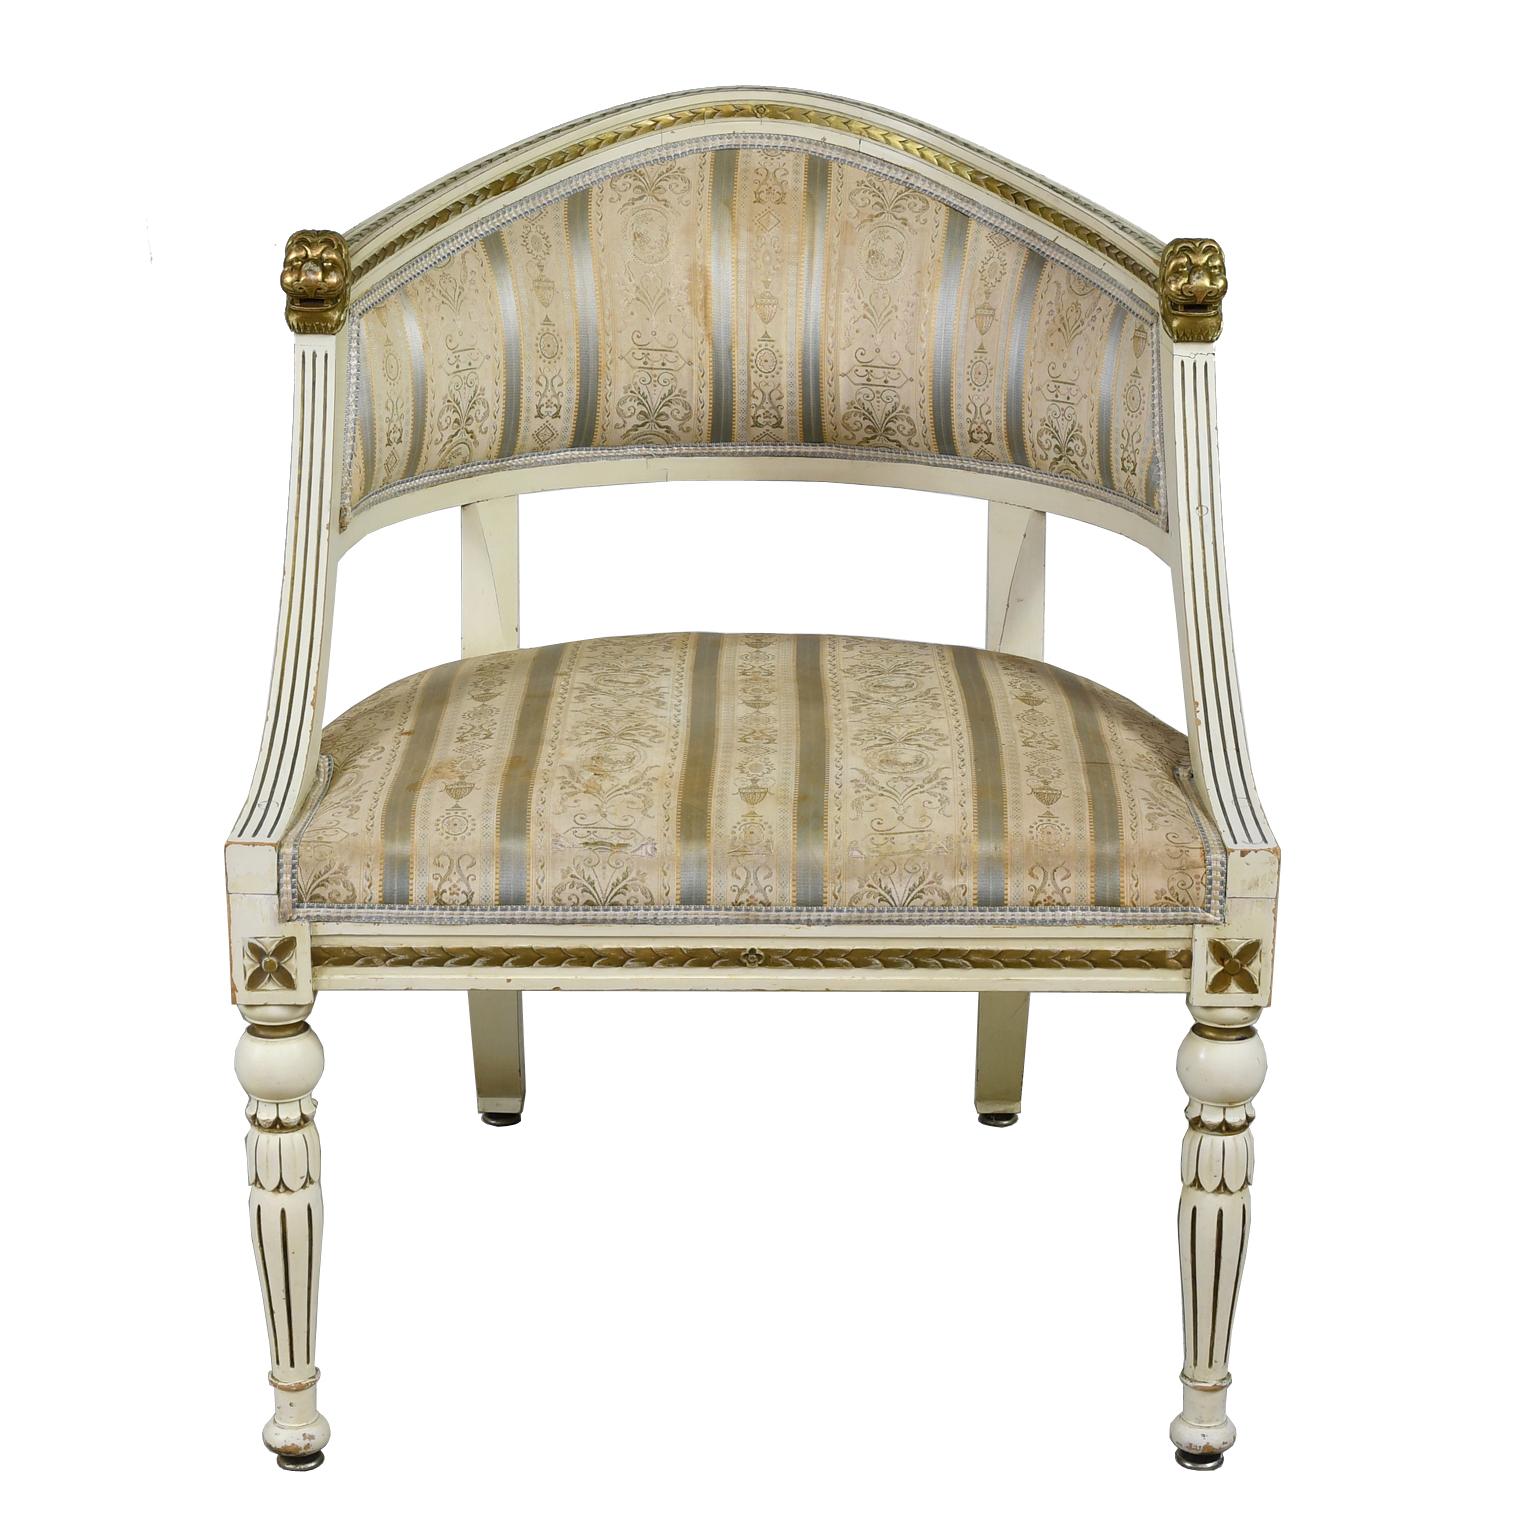 Hand-Carved Pair of Painted Swedish Gustavian-Style Gondola Armchairs with Upholstery